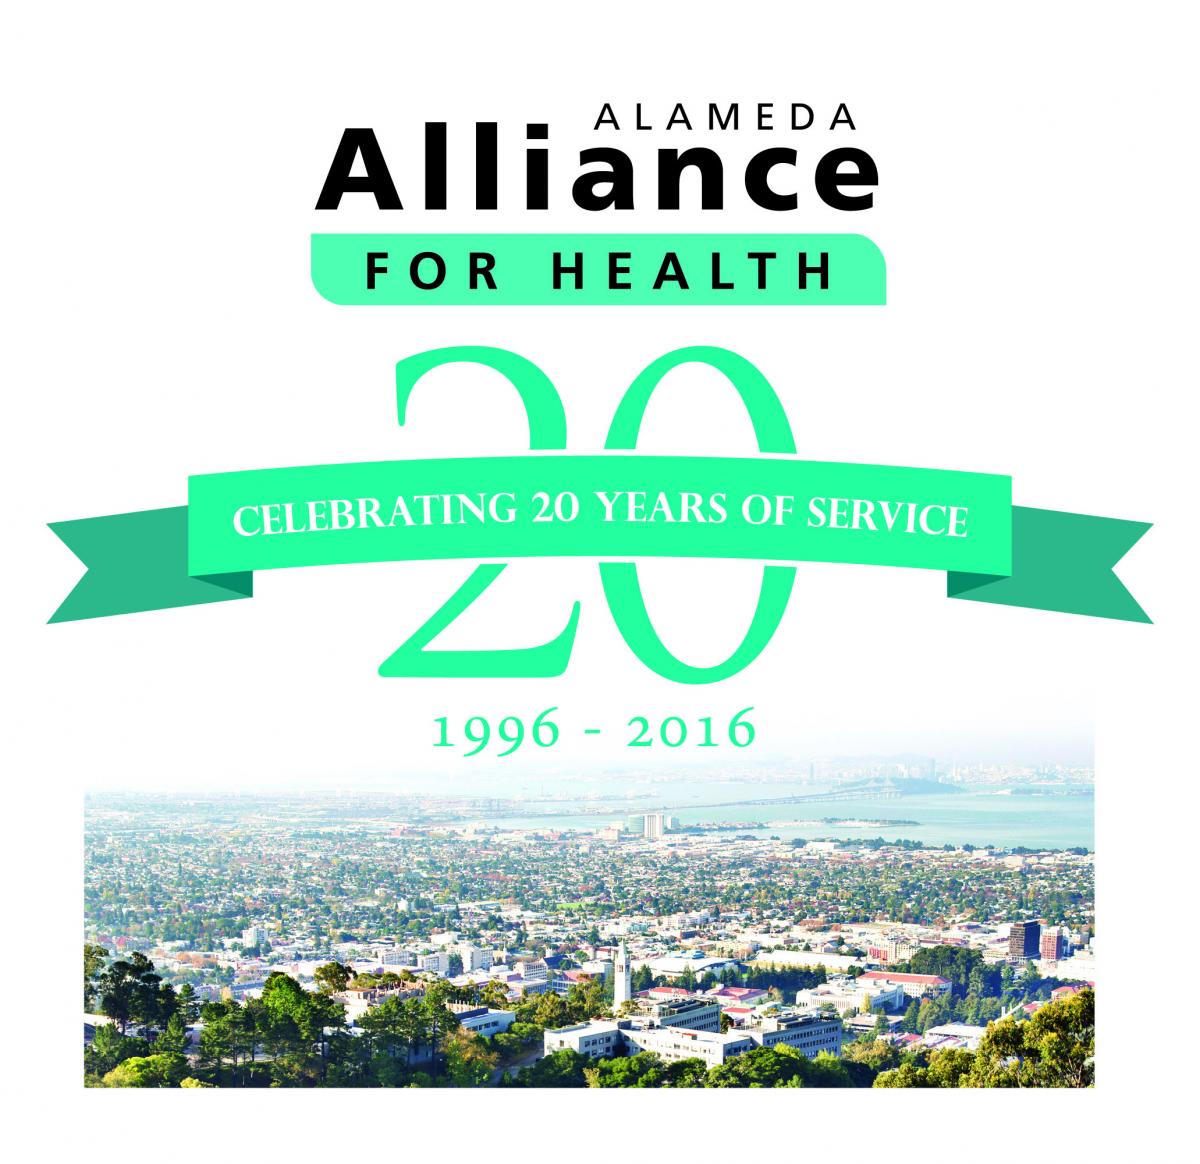 Alameda Alliance for Health Partners with Community in New Health Home